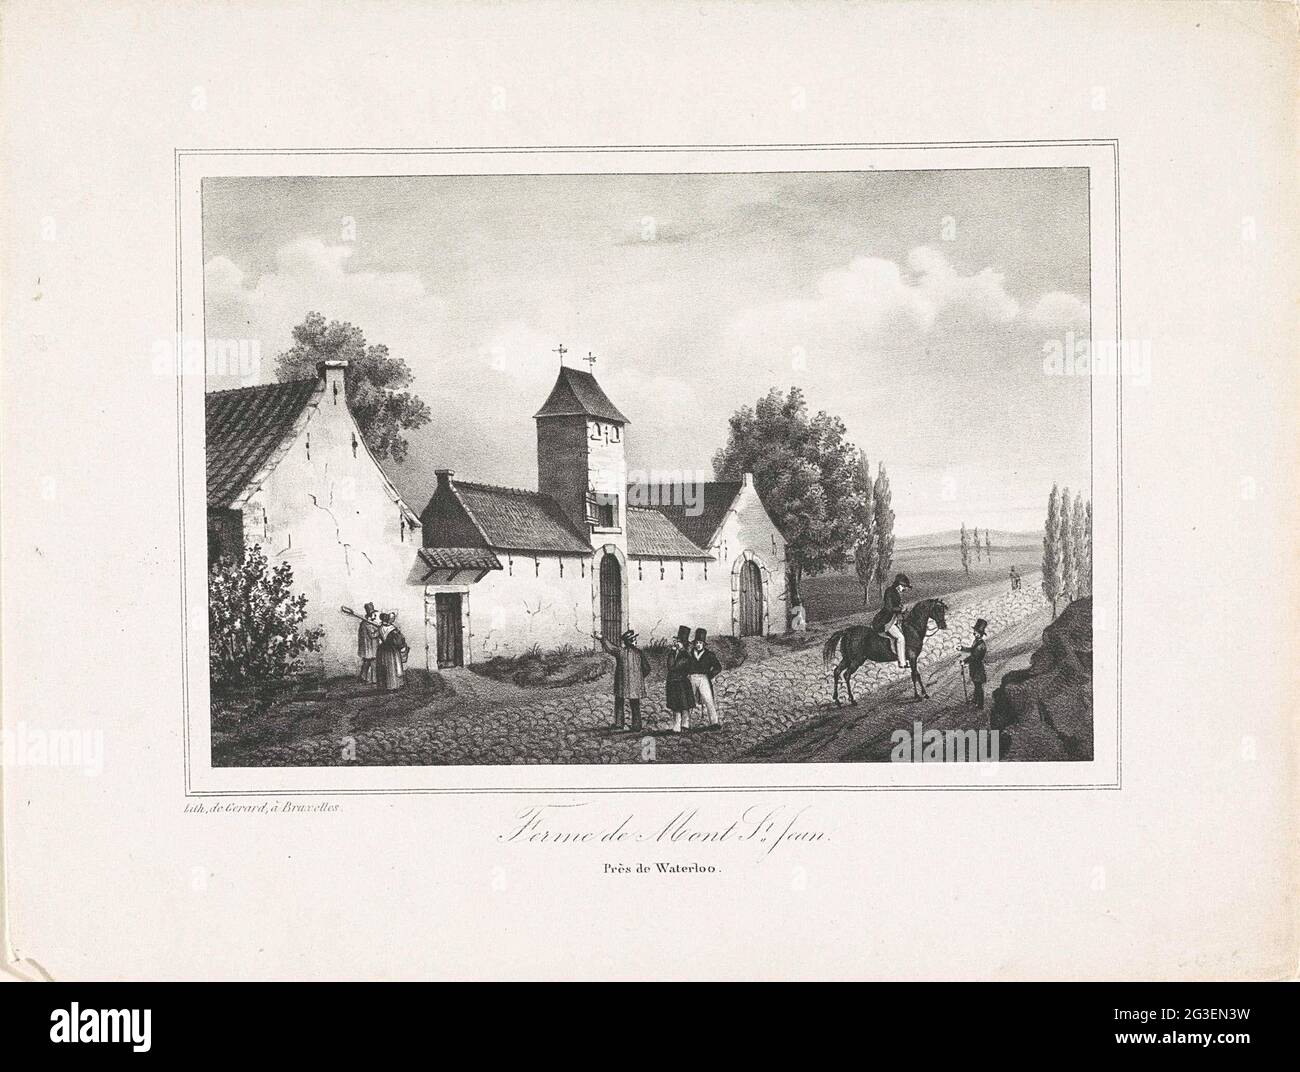 Hoeve in Mont-Saint-Jean; Ferme de Mont St. Jean. Prés de waterloo; Loose  plates from a series of lithographs from the Waterloo area. View of a farm  located on a street in the